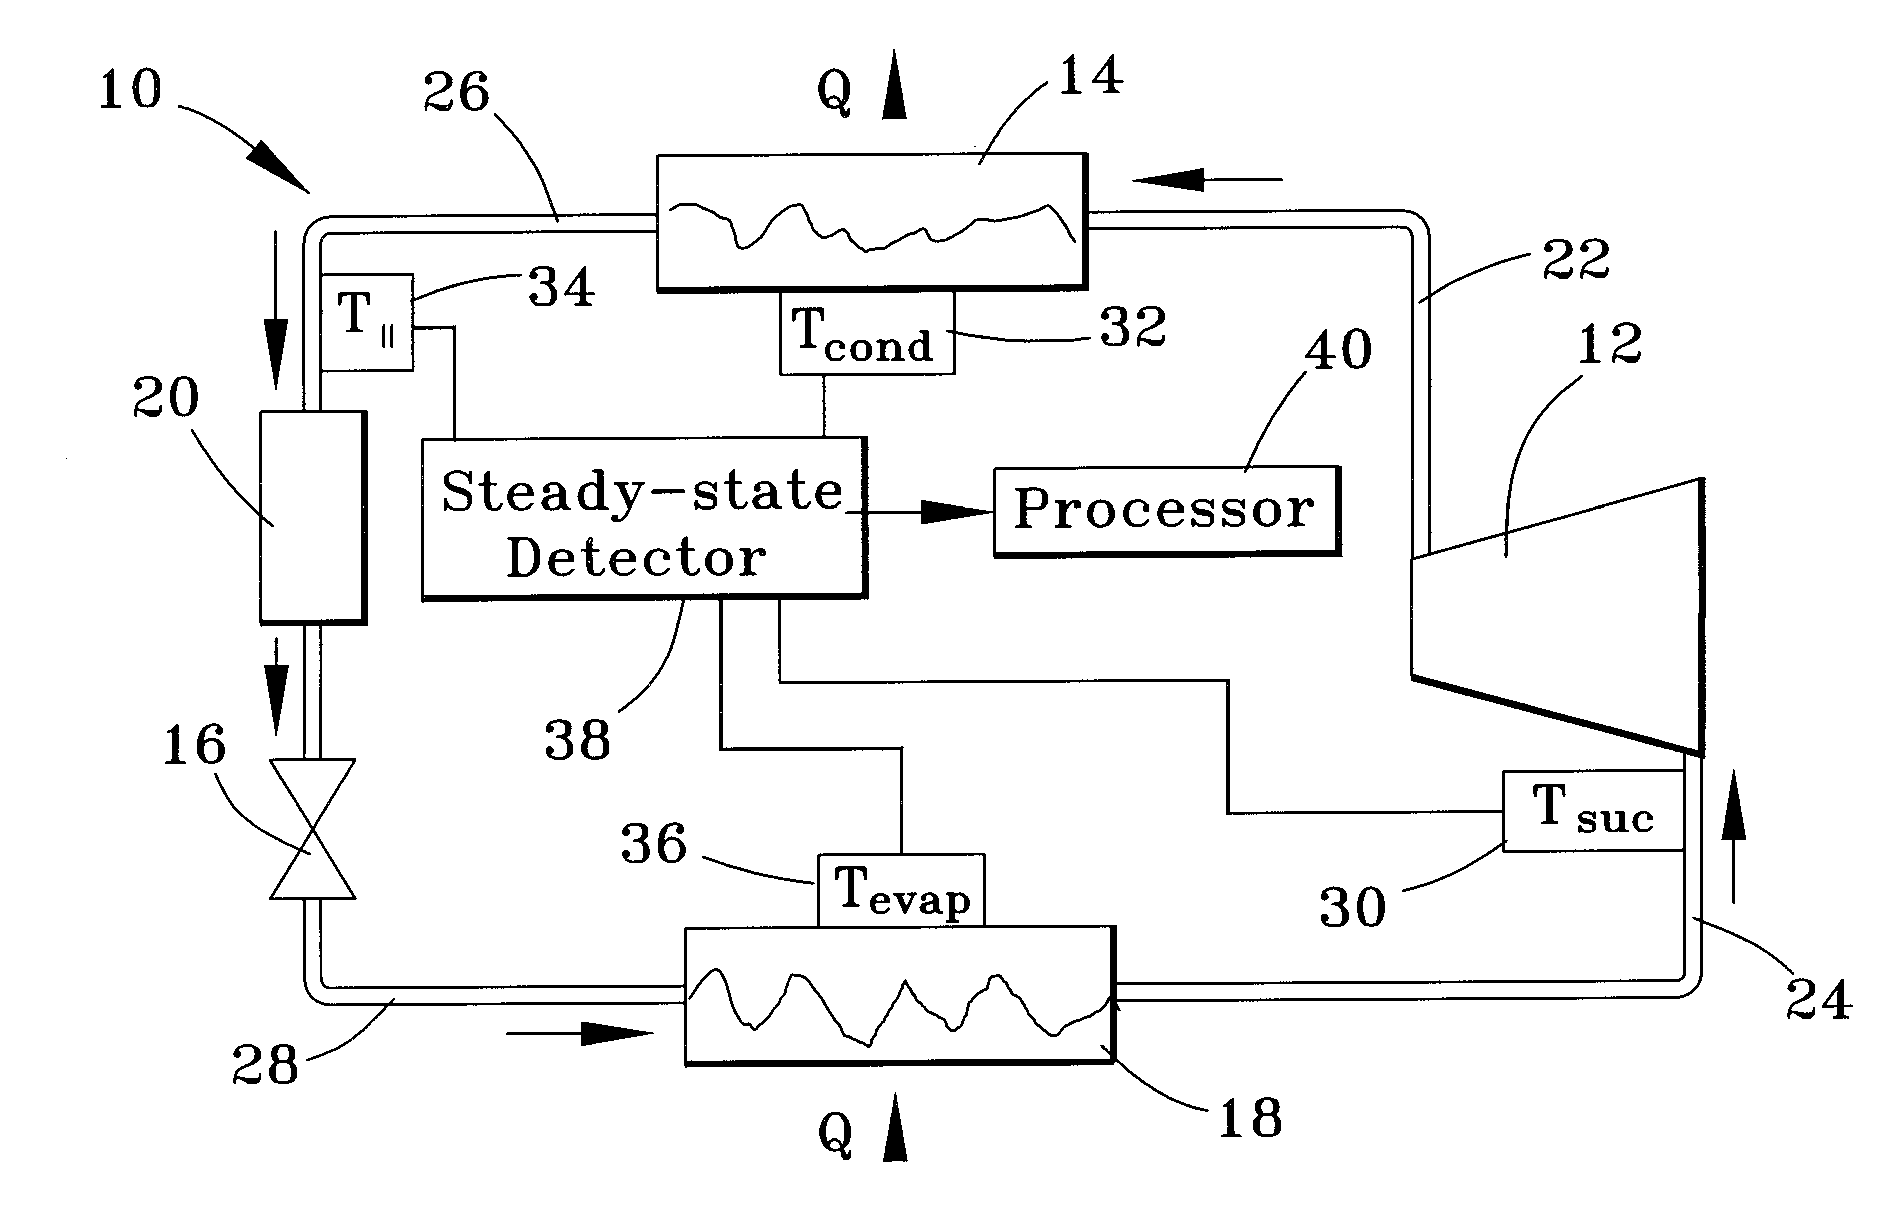 Apparatus and method for determining refrigerant charge level